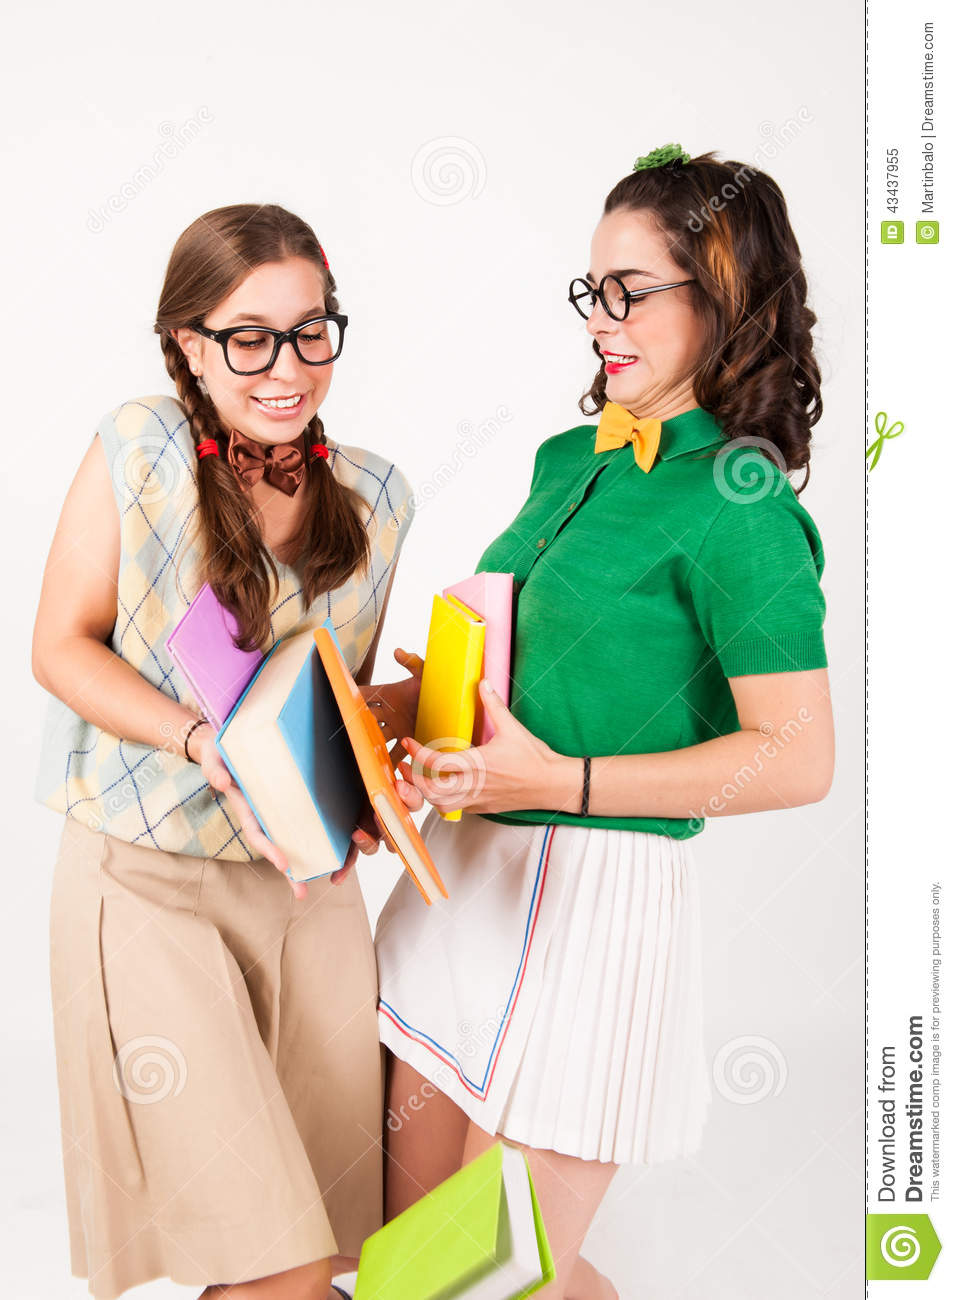 Cute Nerdy Girls Bump Into Each Other  Stock Photo   Image  43437955